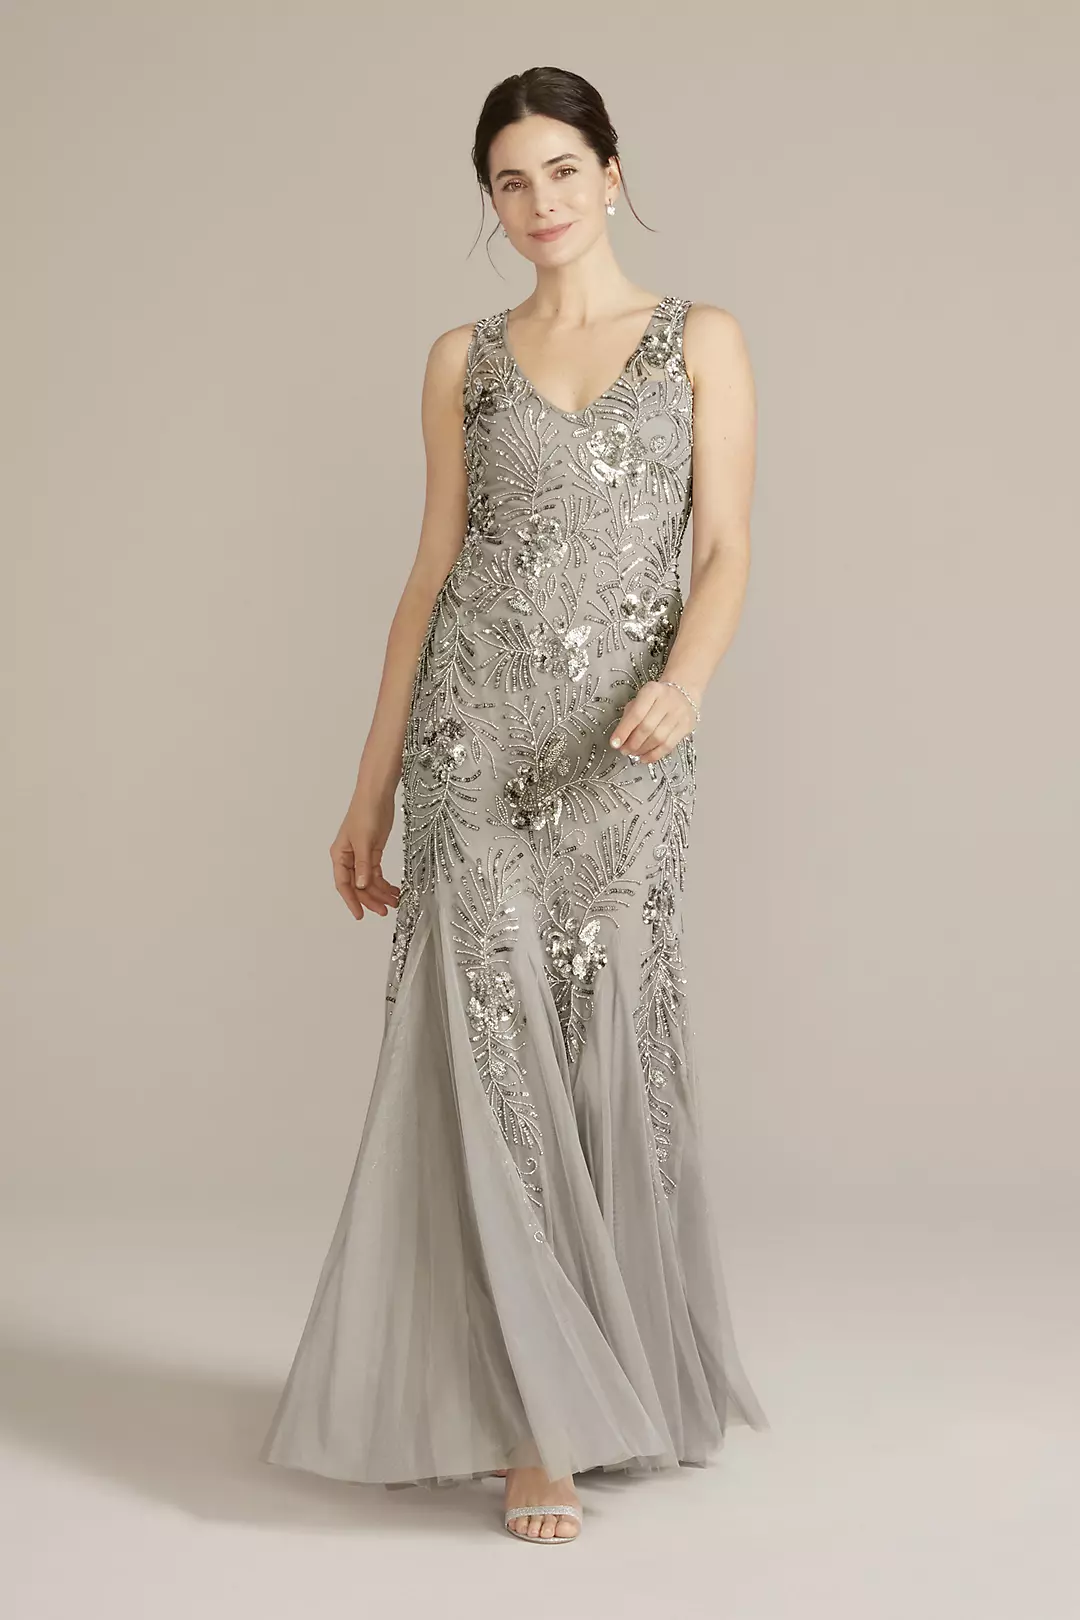 Beaded Sheath Tank Gown with Godets Image